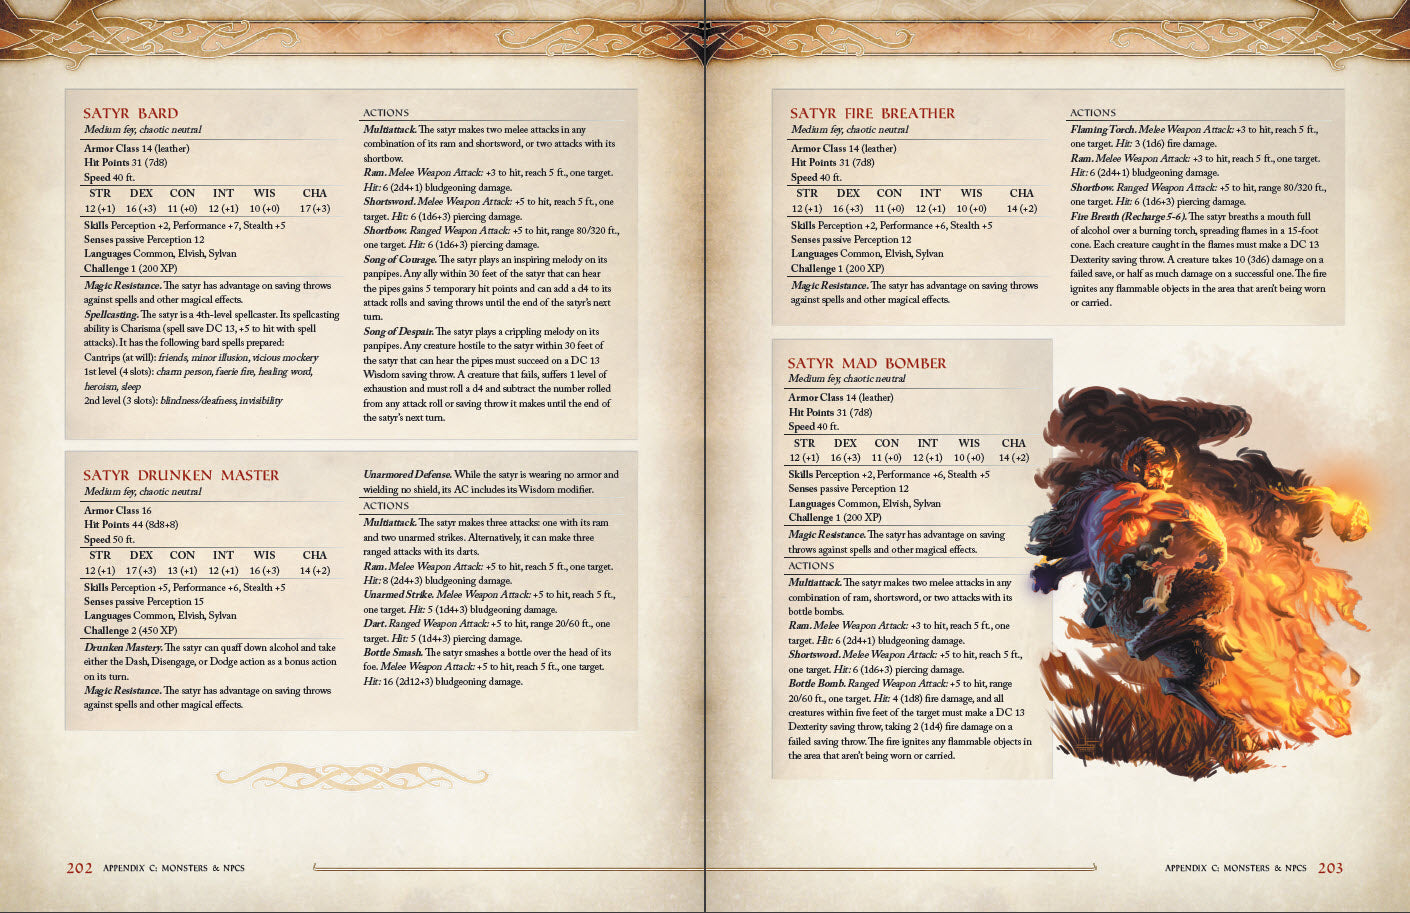 Play DnD in the world of One Piece with a 200-page homebrew